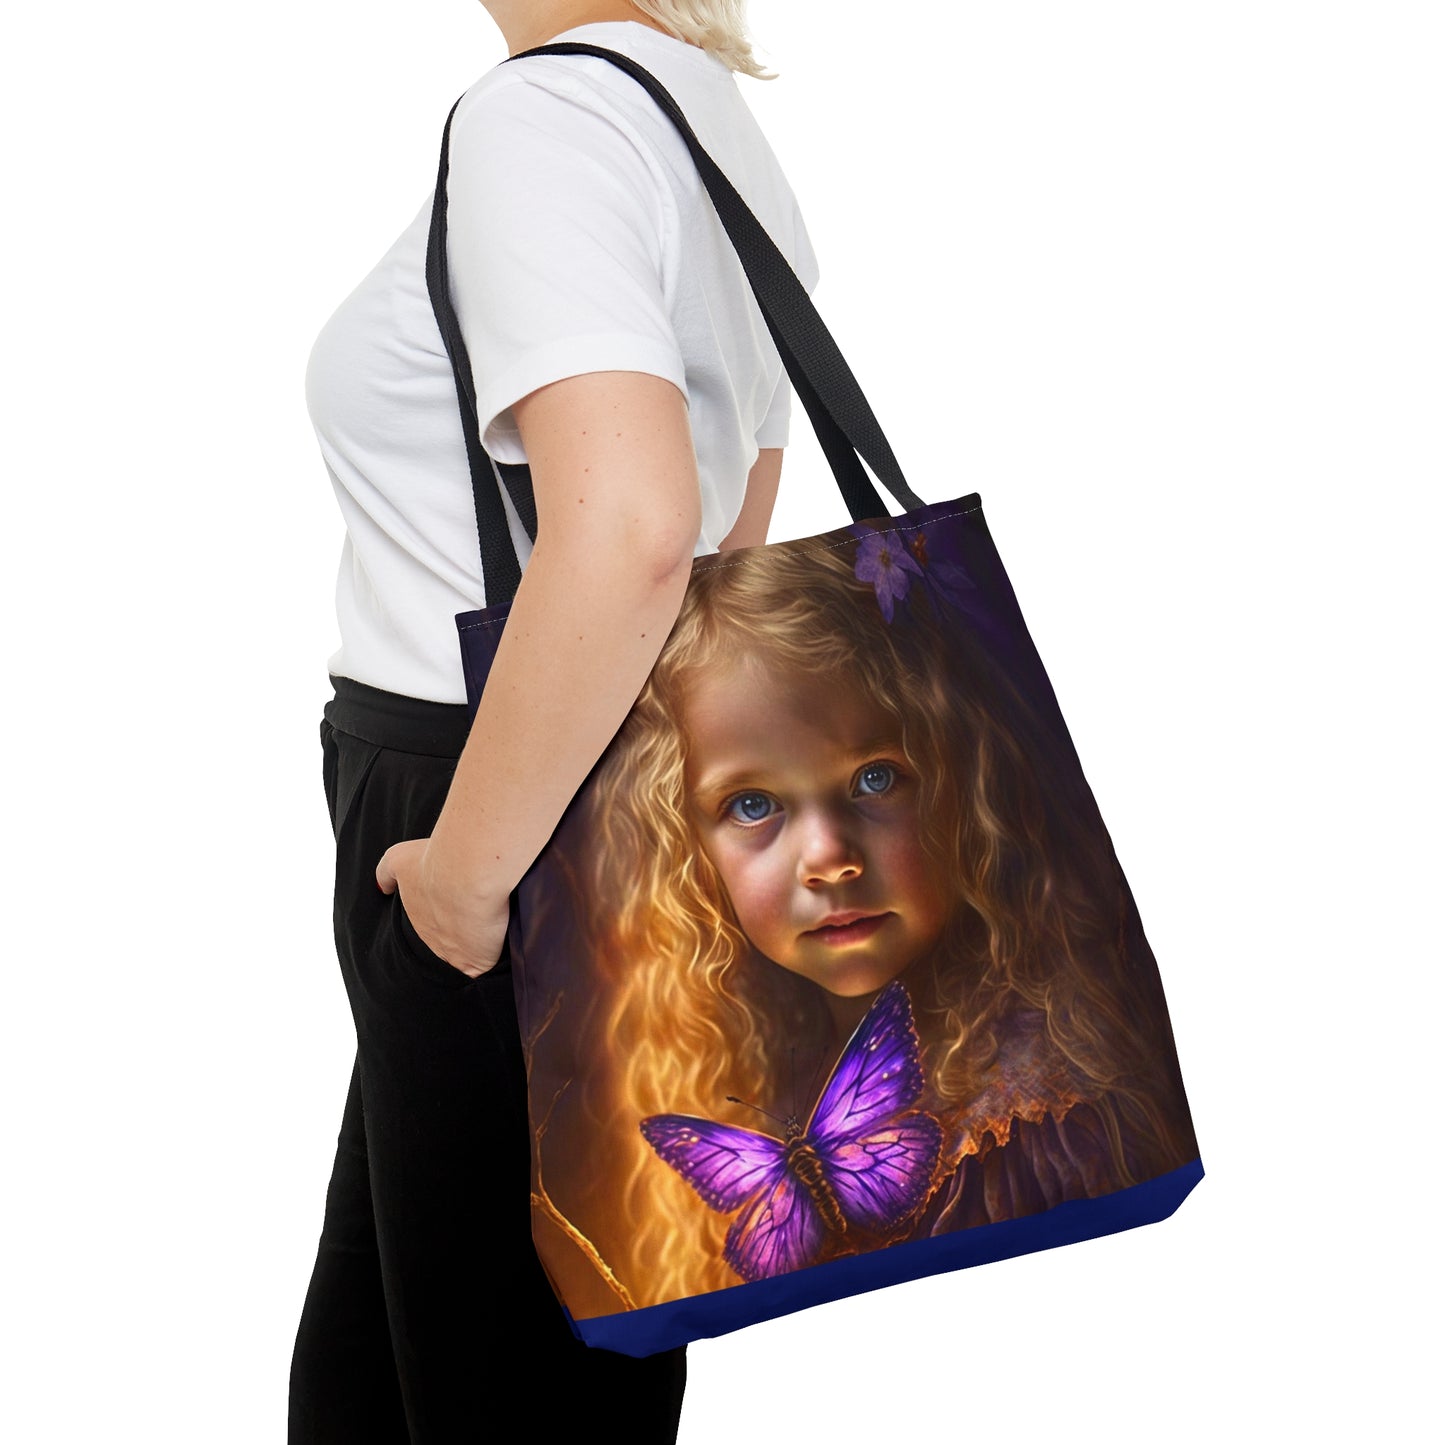 Tote Bag - Lucy and the Enchanted Forest 2